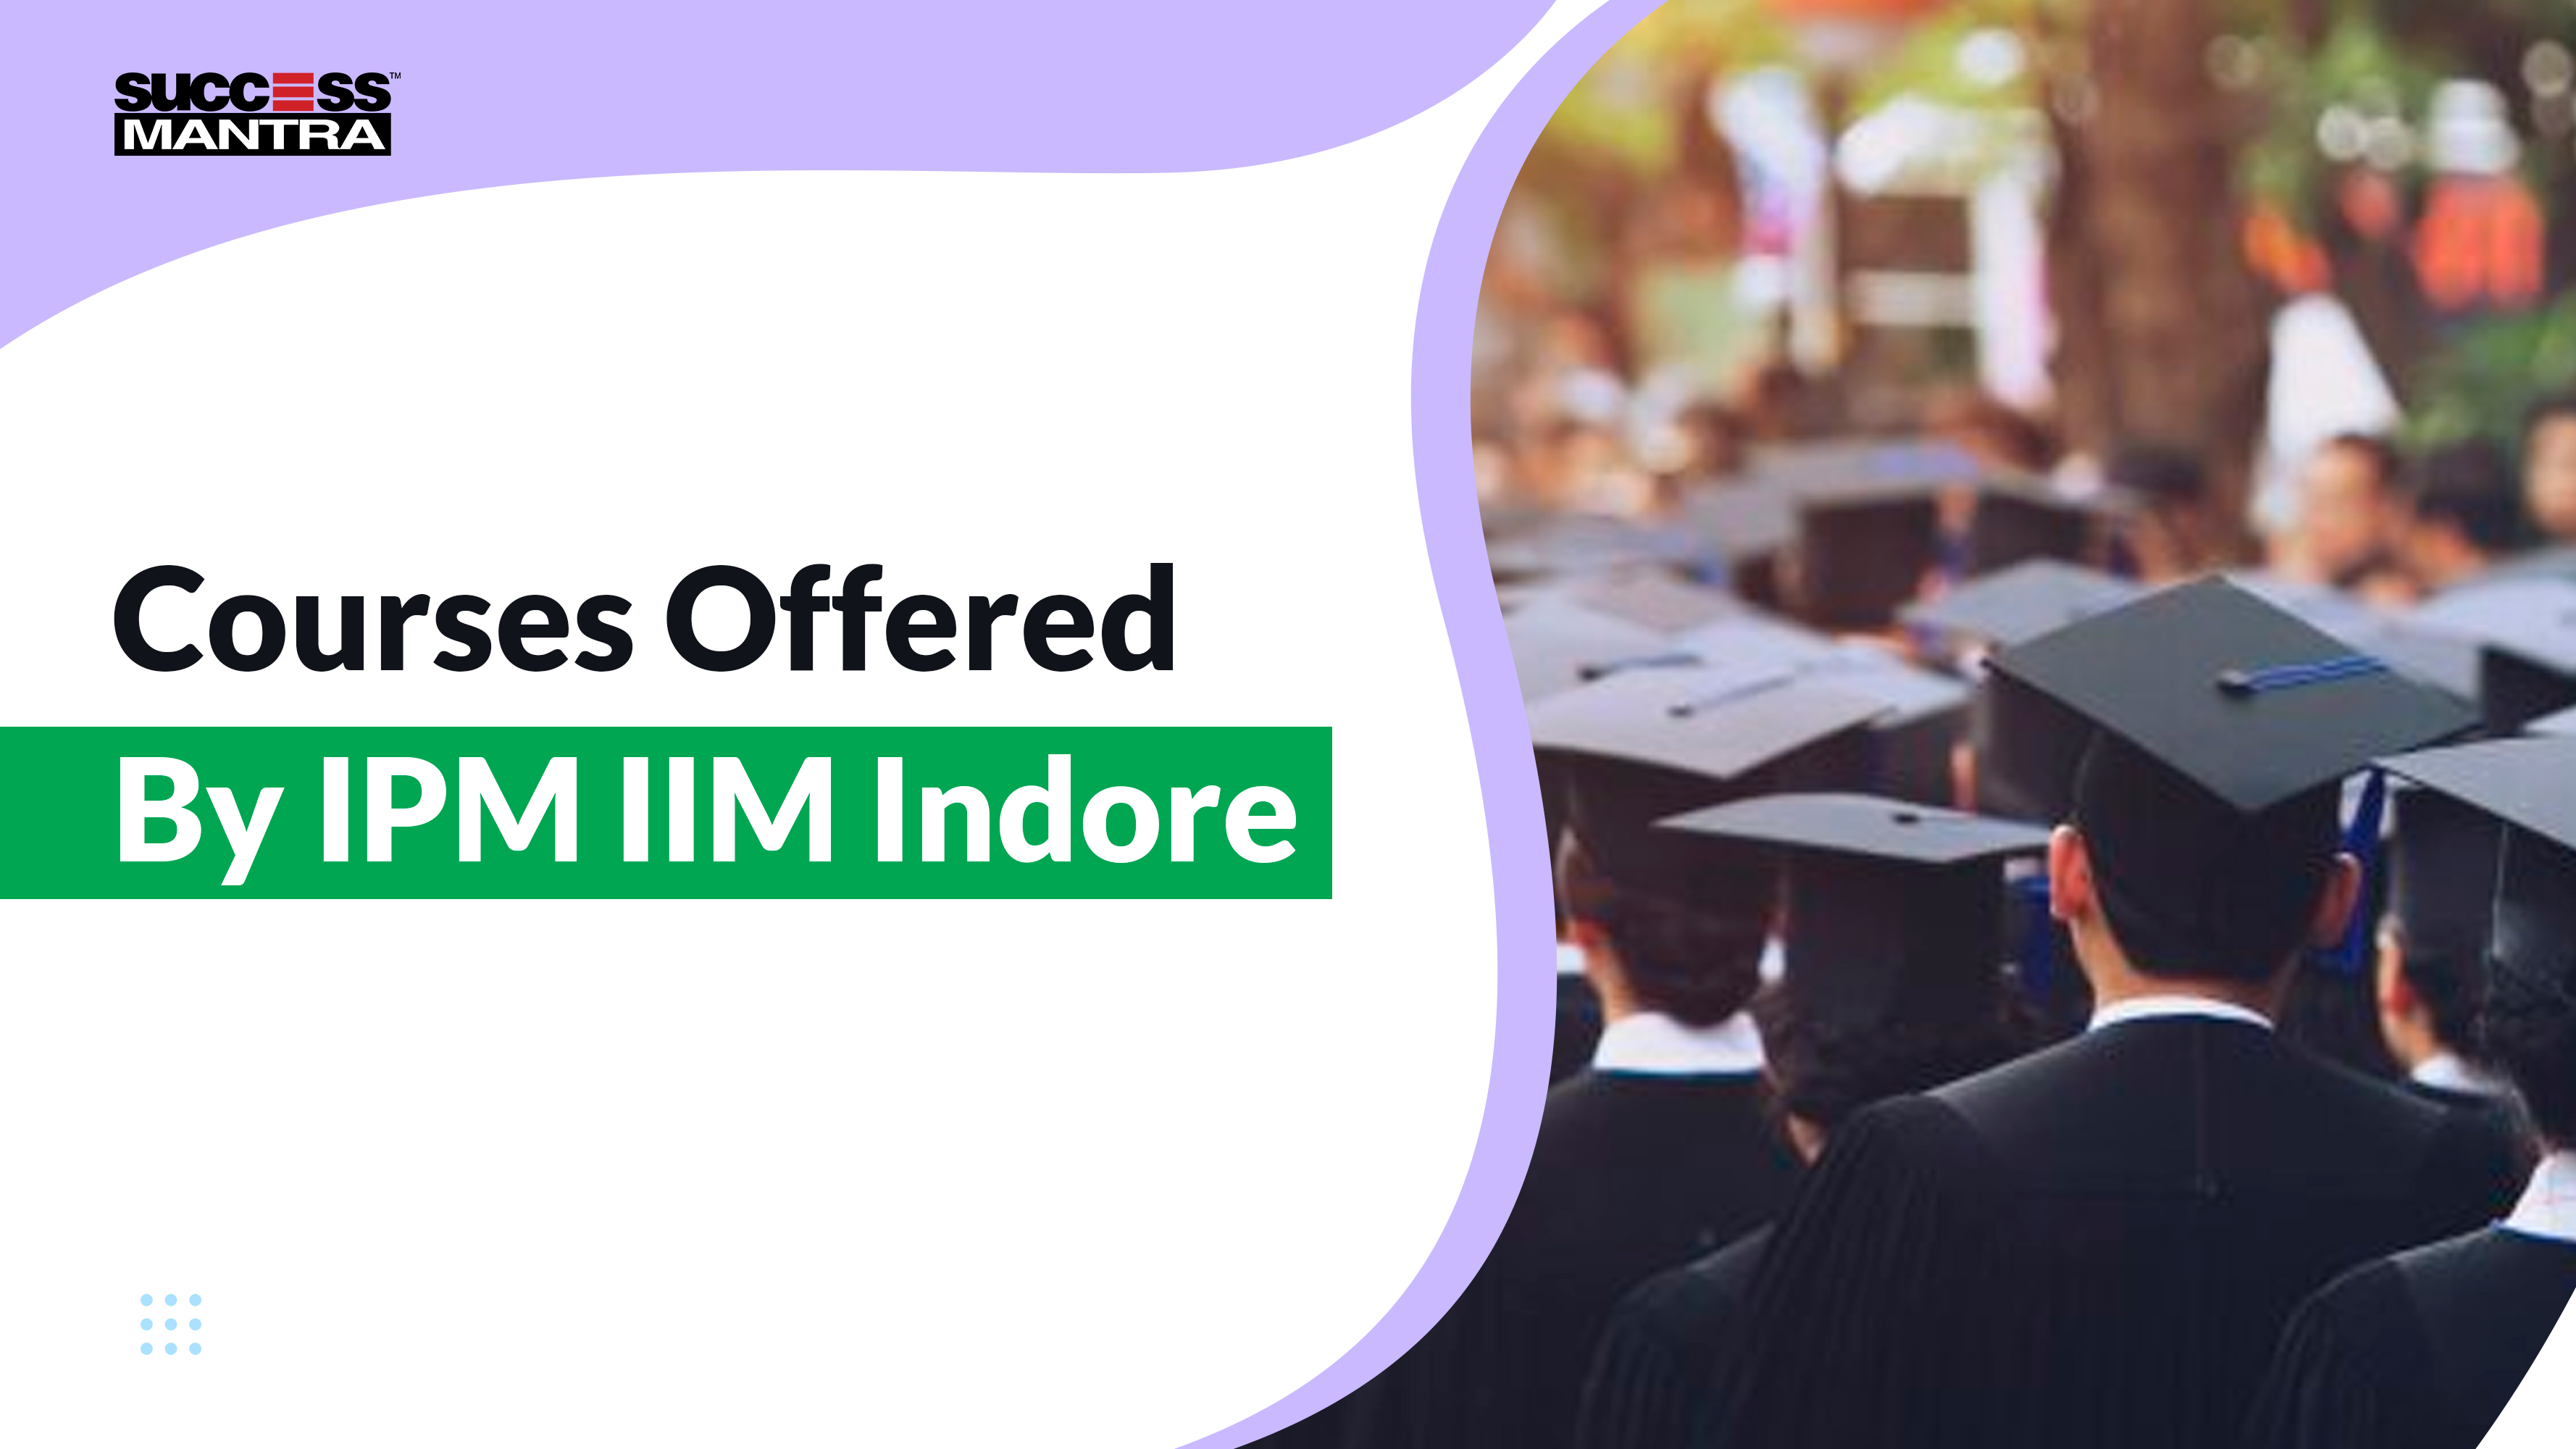 Courses Offered By IPM IIM Indore